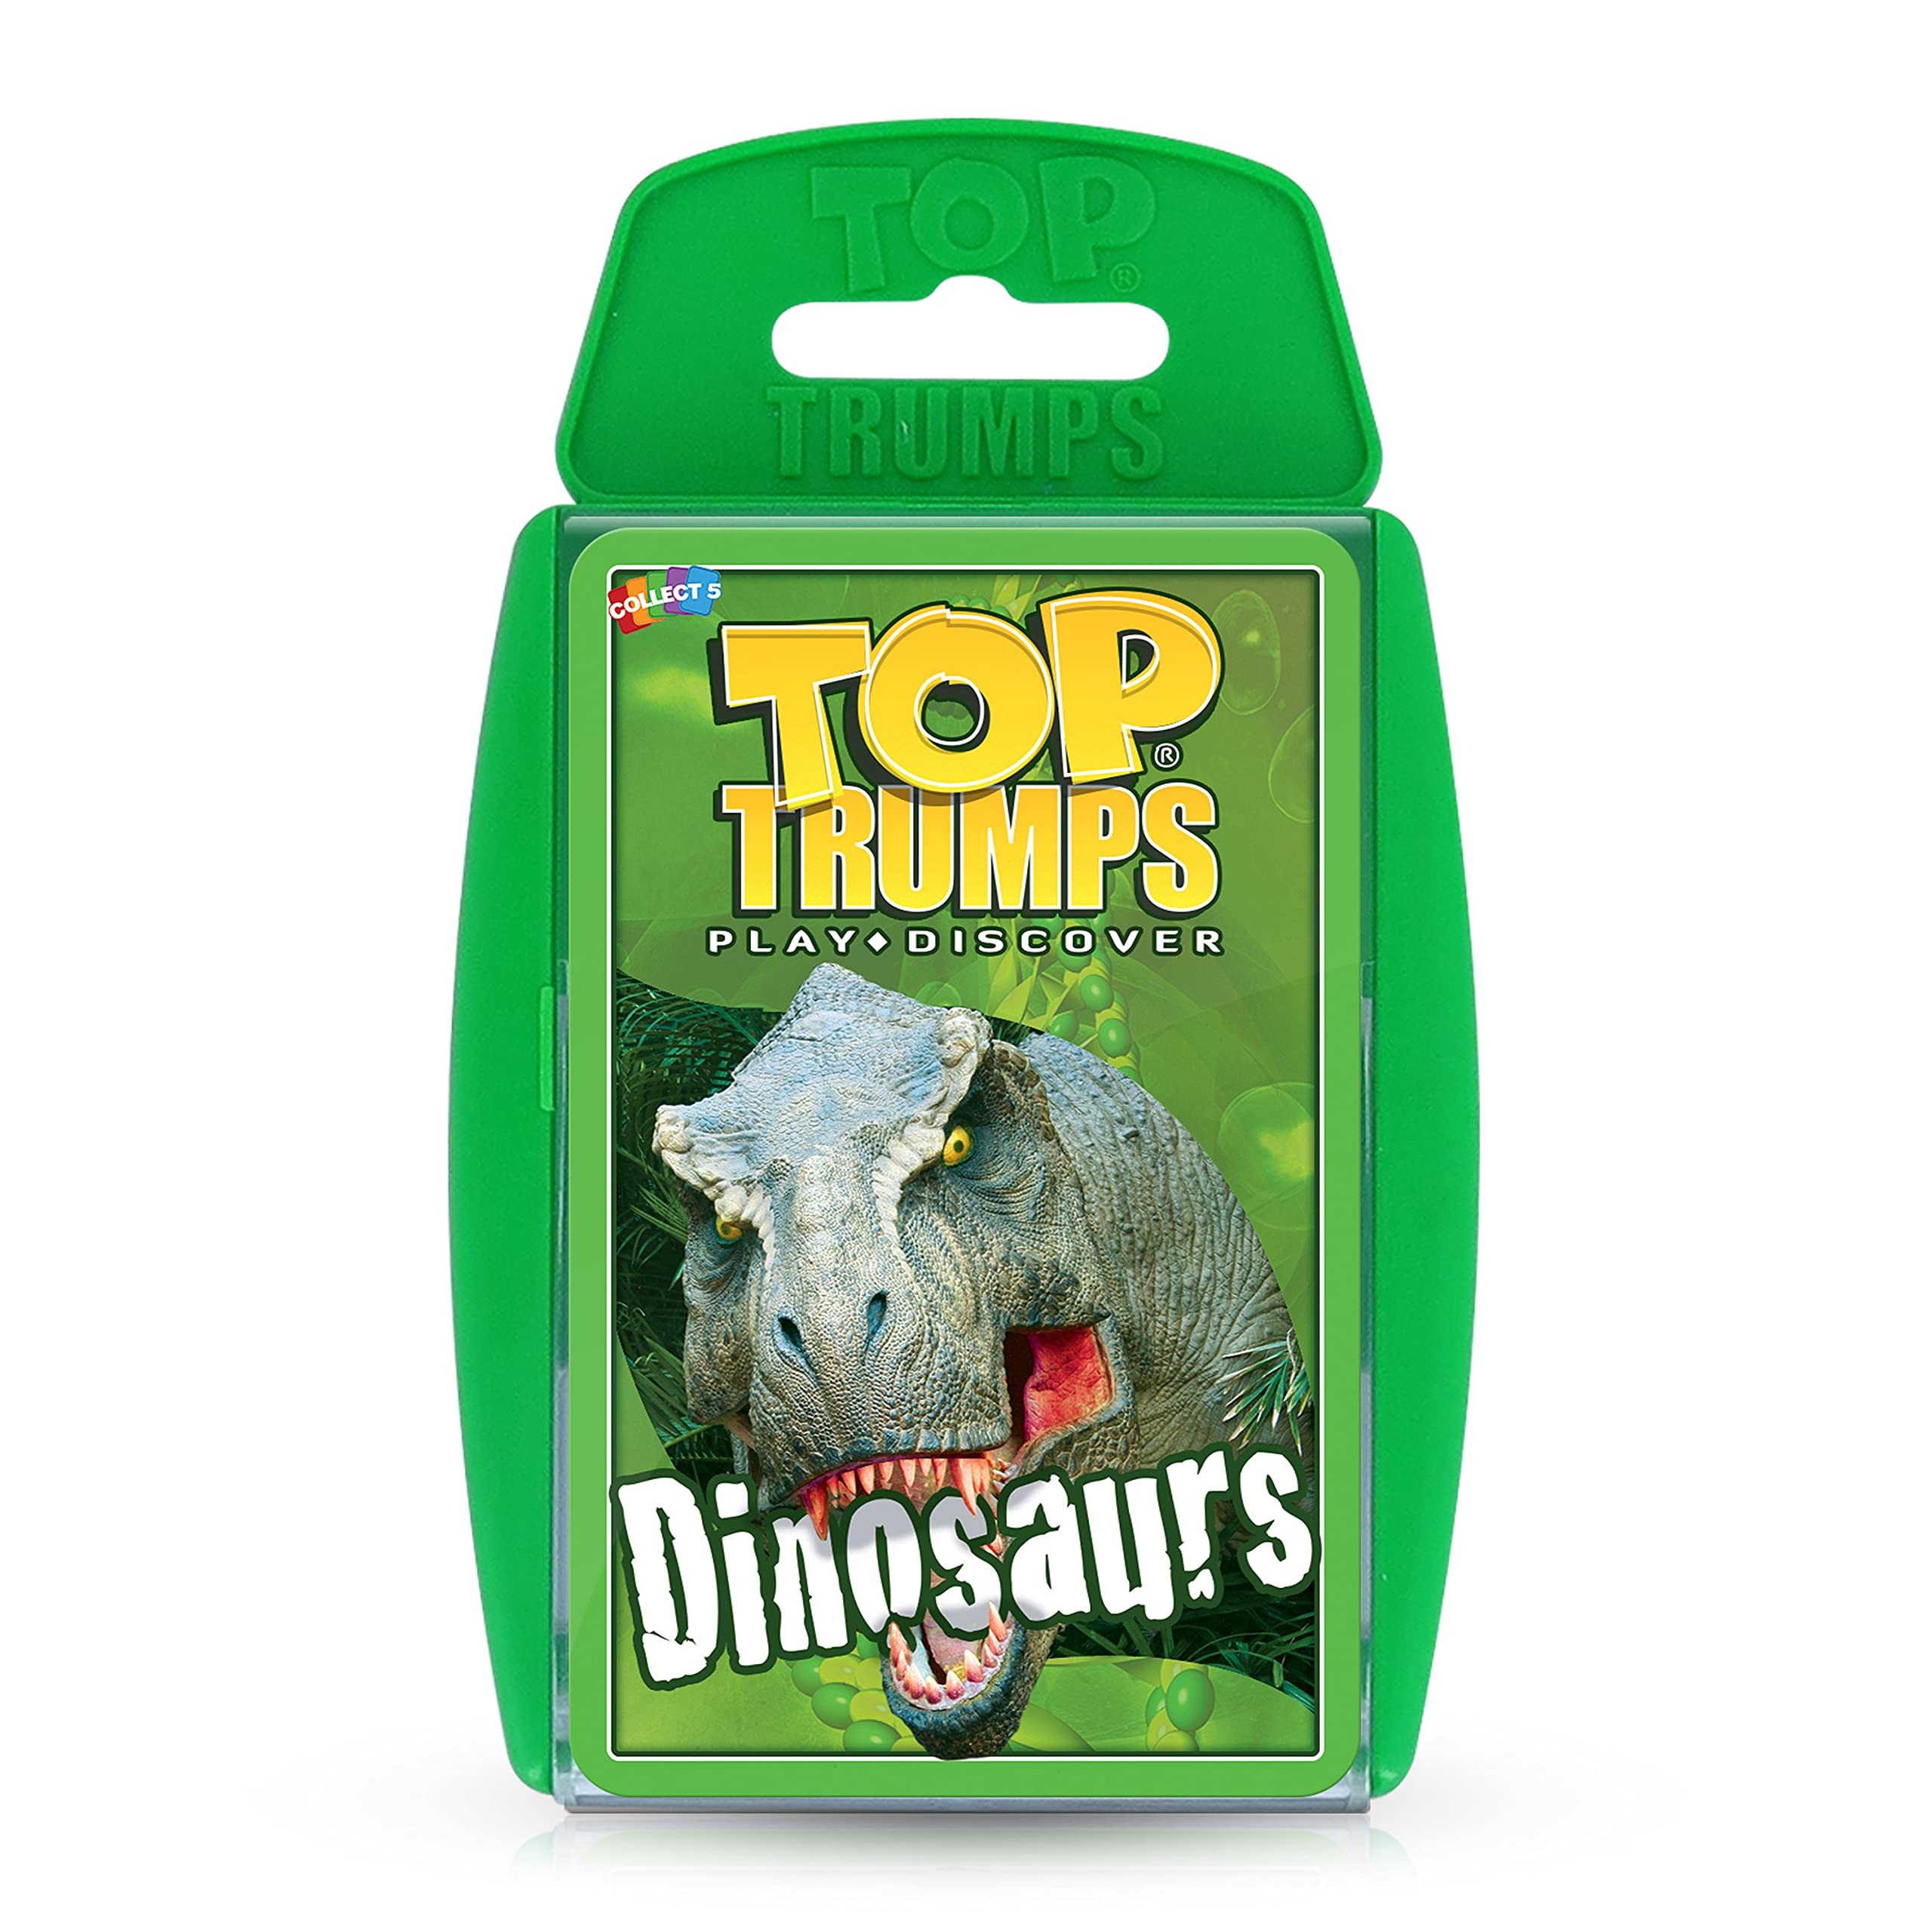  Top Trumps Harry Potter Magical Creatures 500 Pc Jigsaw Puzzle  : Toys & Games